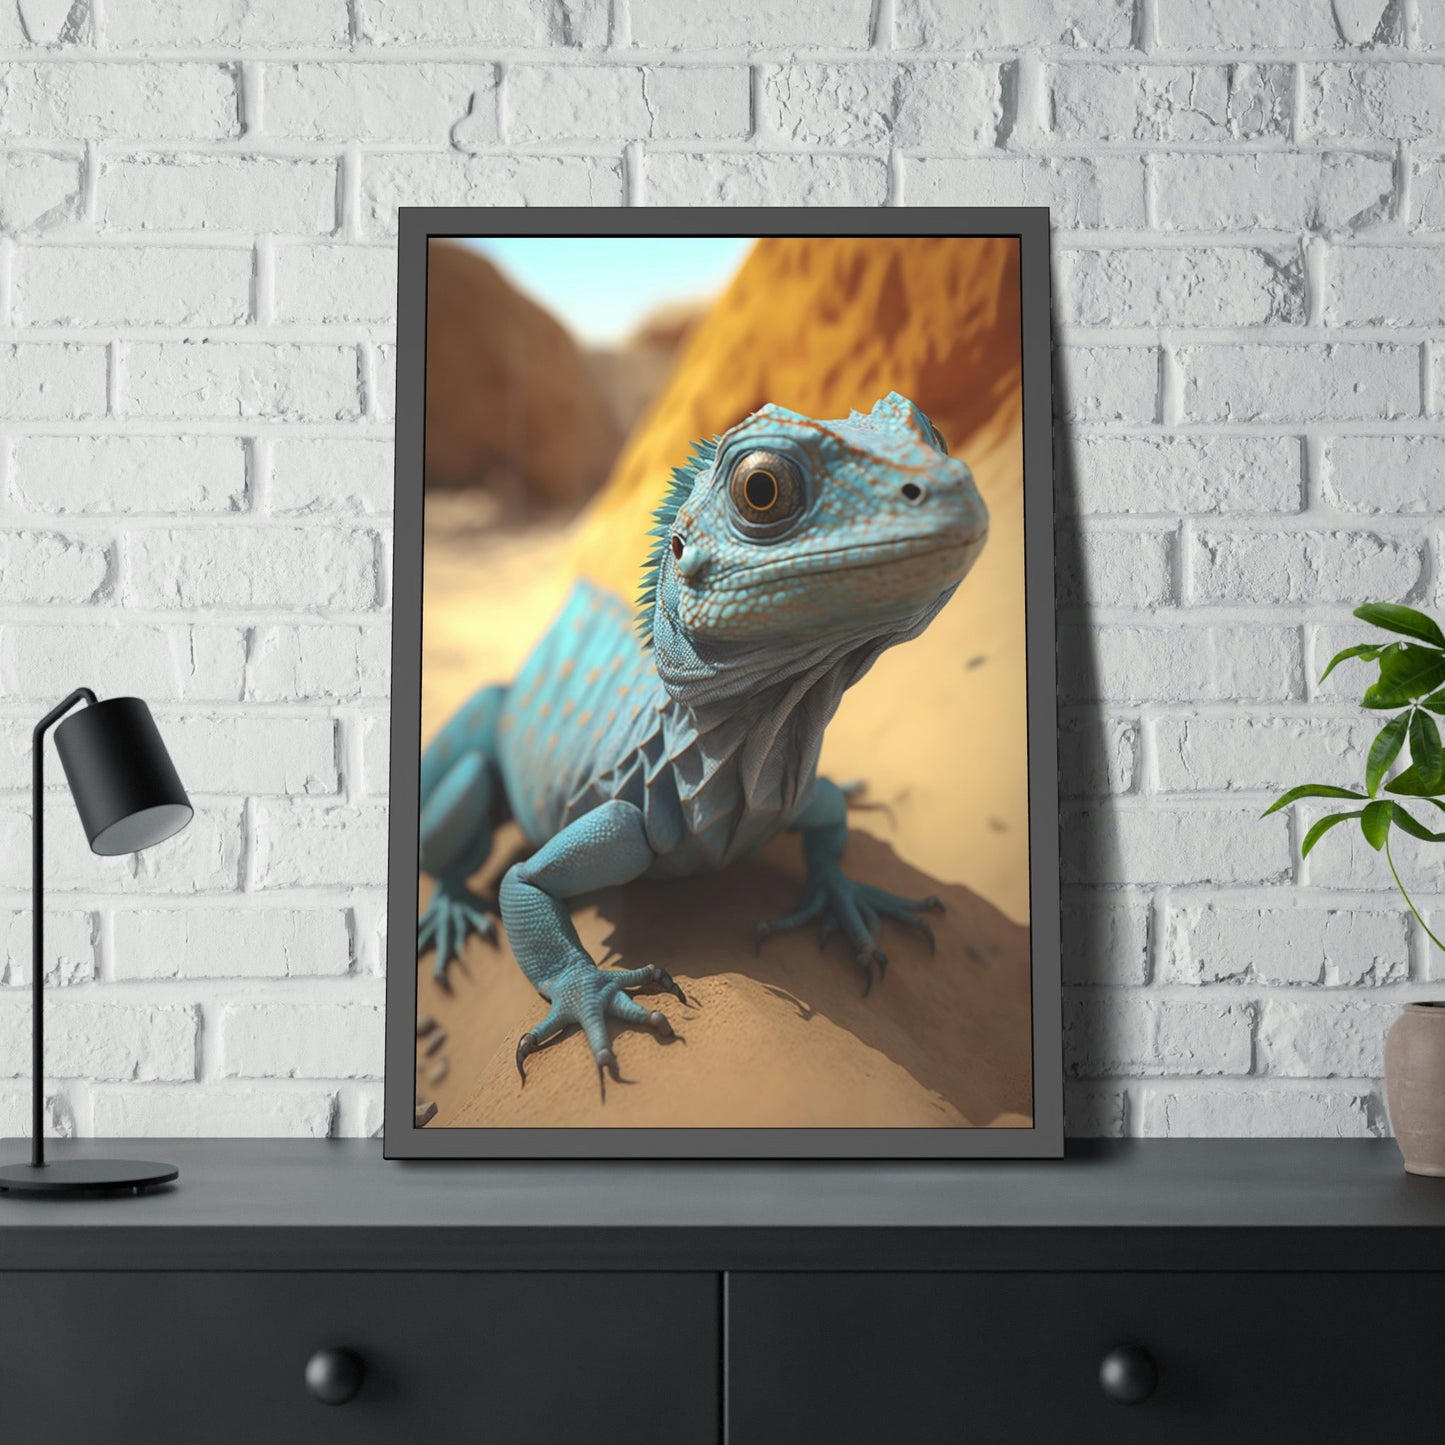 Lizard in the Wild: Vibrant Canvas and Poster of a Majestic Reptile